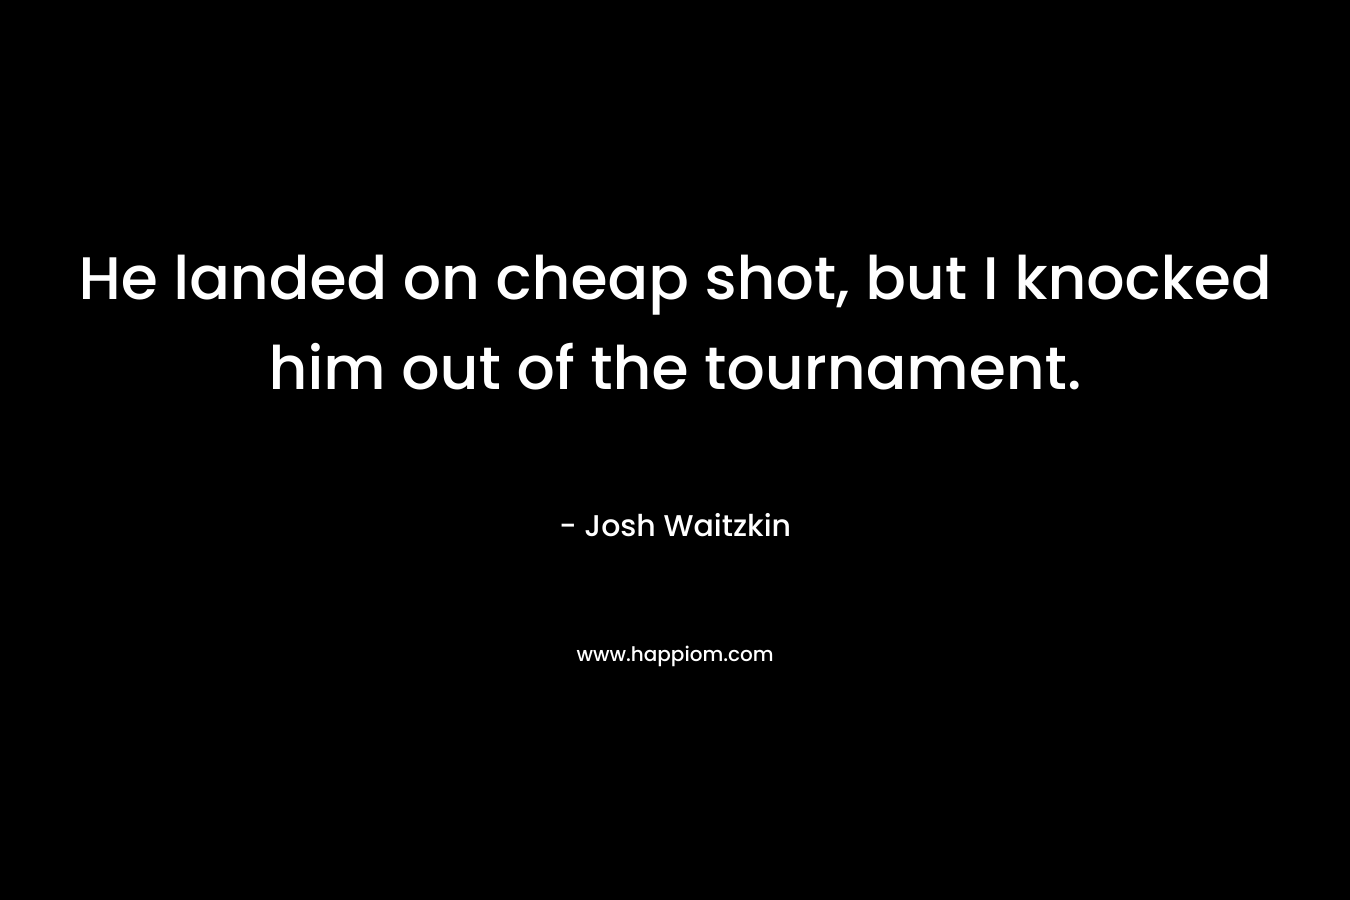 He landed on cheap shot, but I knocked him out of the tournament. – Josh Waitzkin